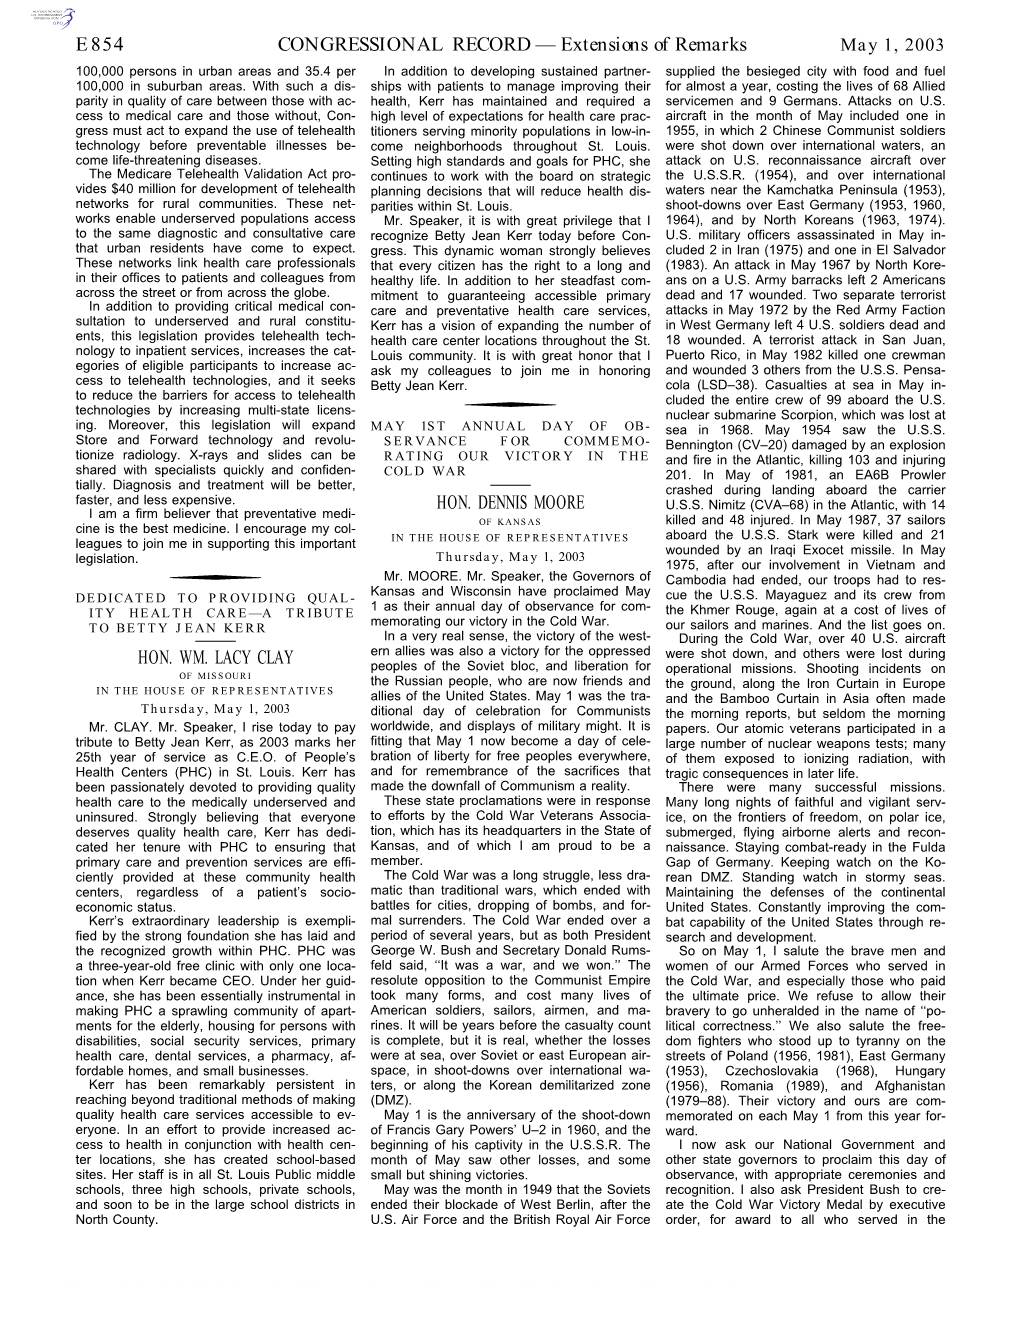 CONGRESSIONAL RECORD— Extensions of Remarks E854 HON